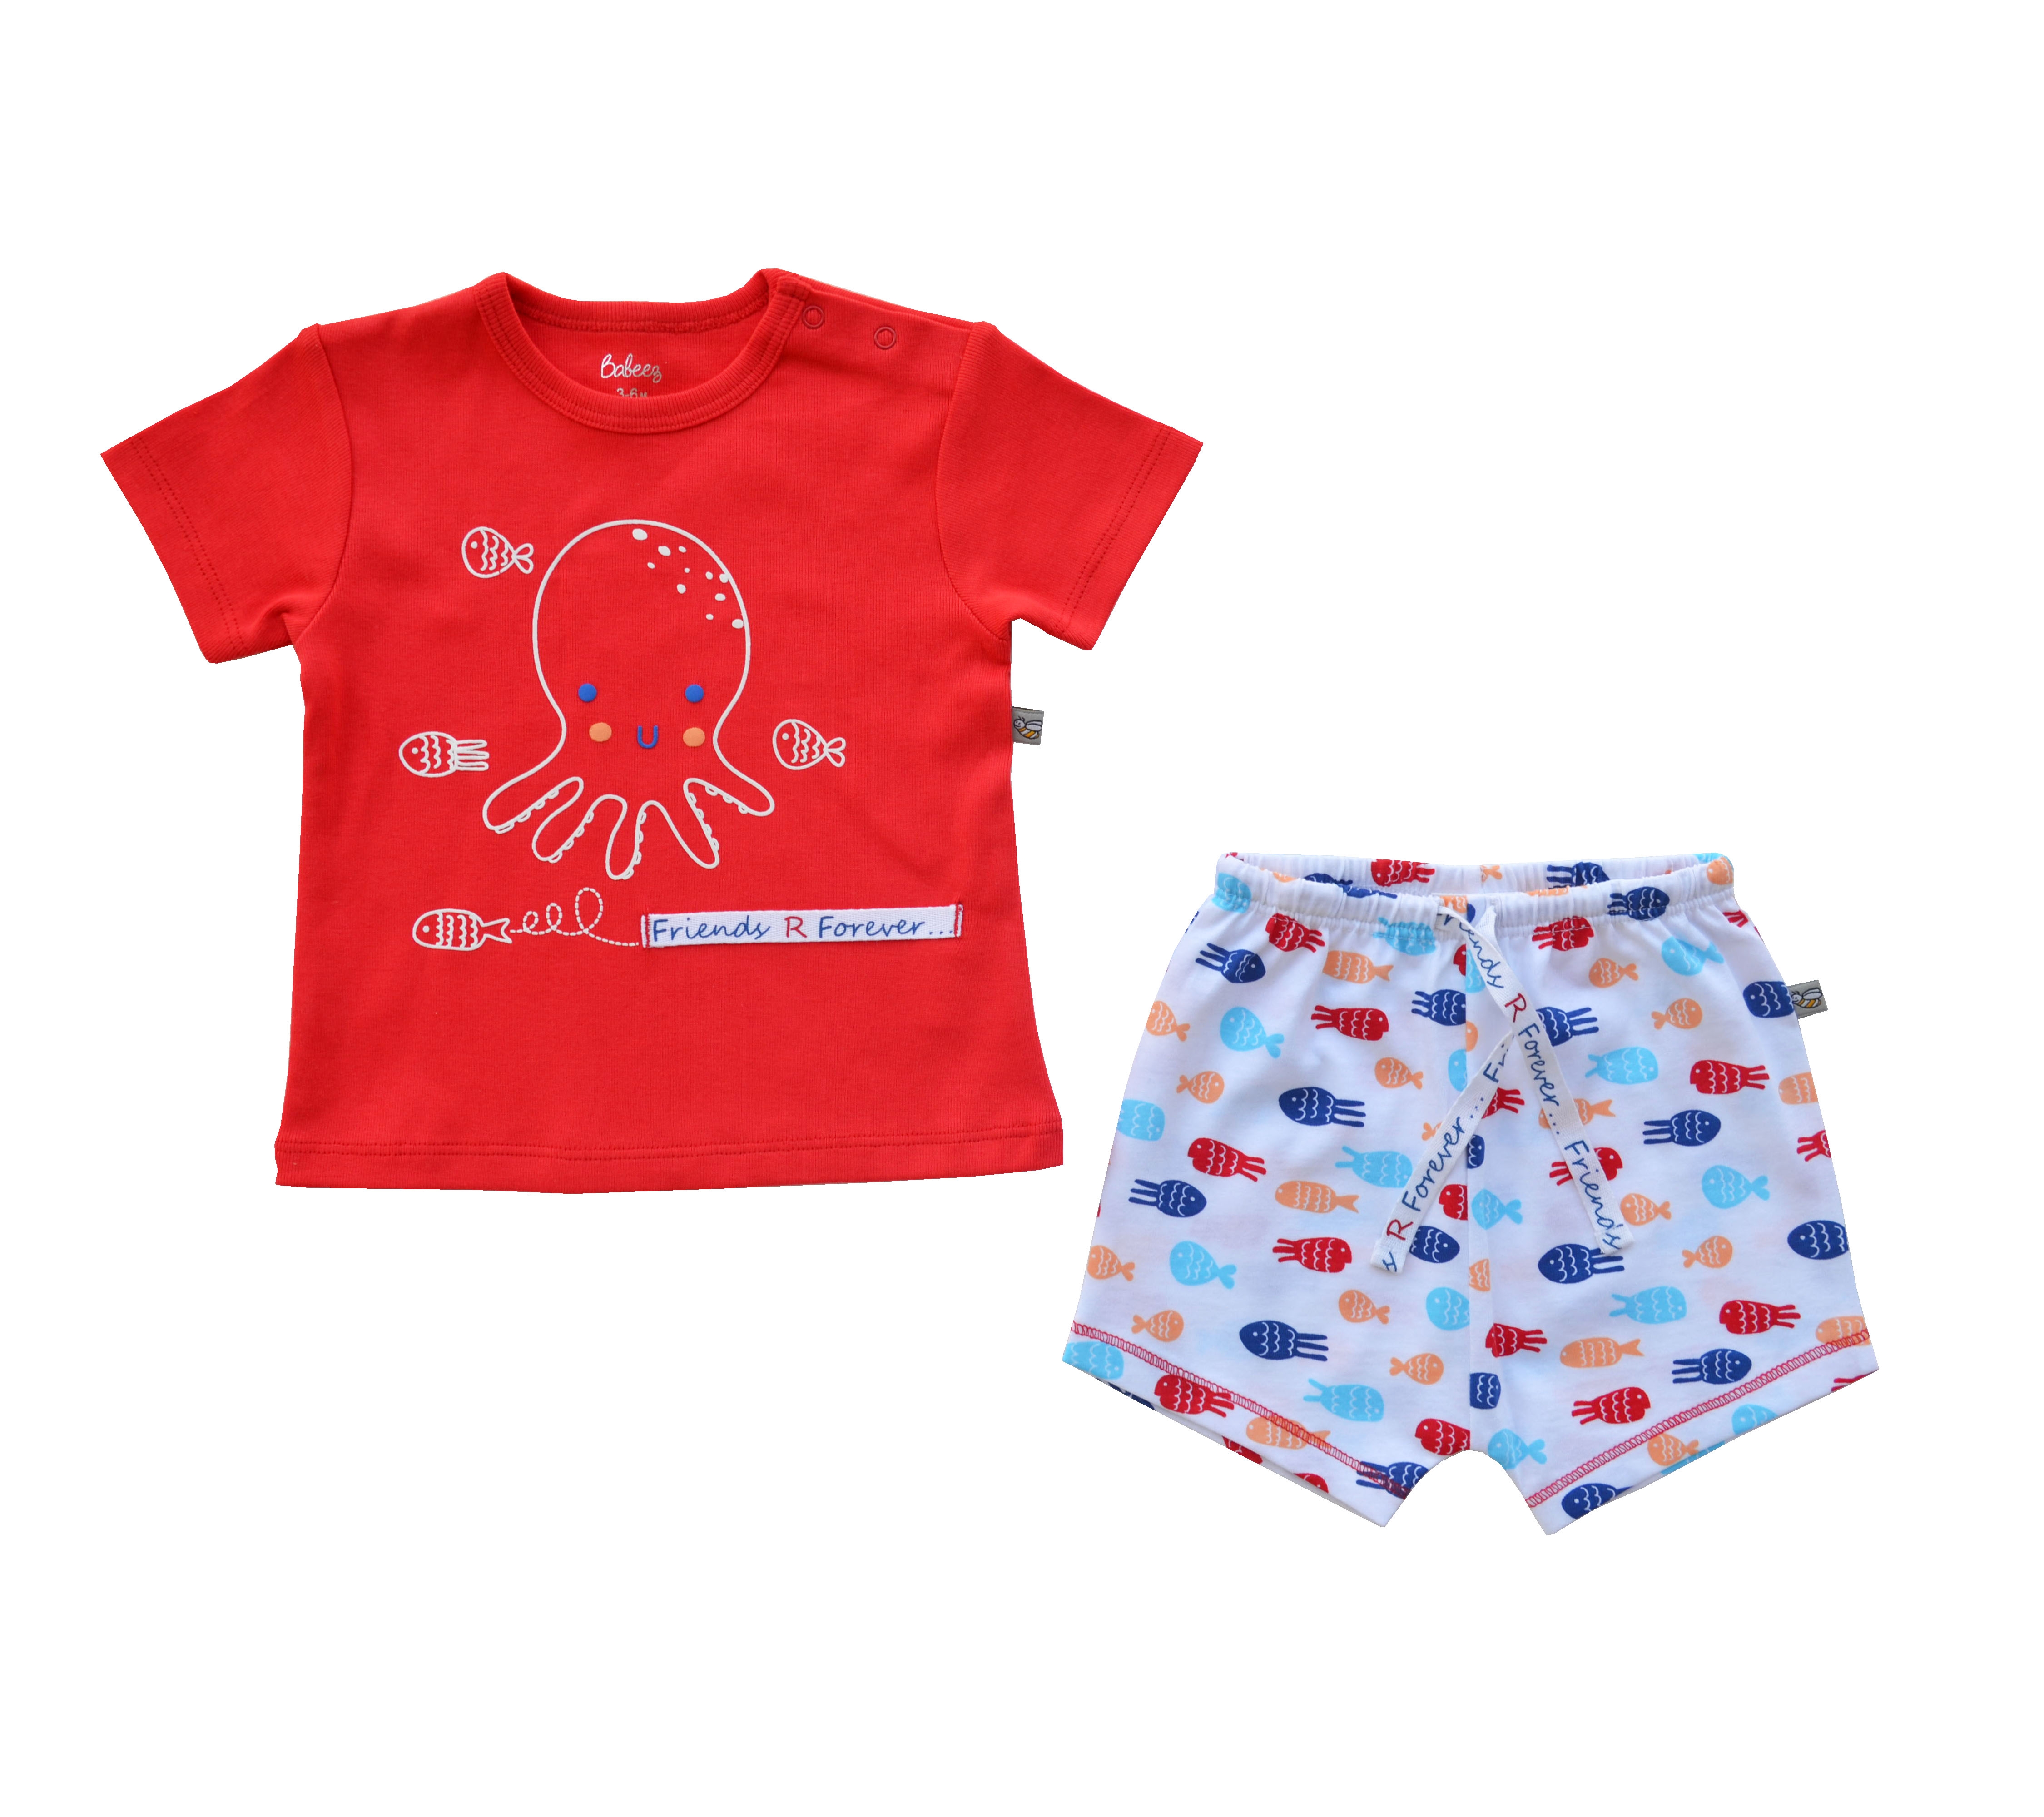 Octopus Printed Red T-Shirt + White Fish Allover Print Shorty Set (100% Cotton Jersey)